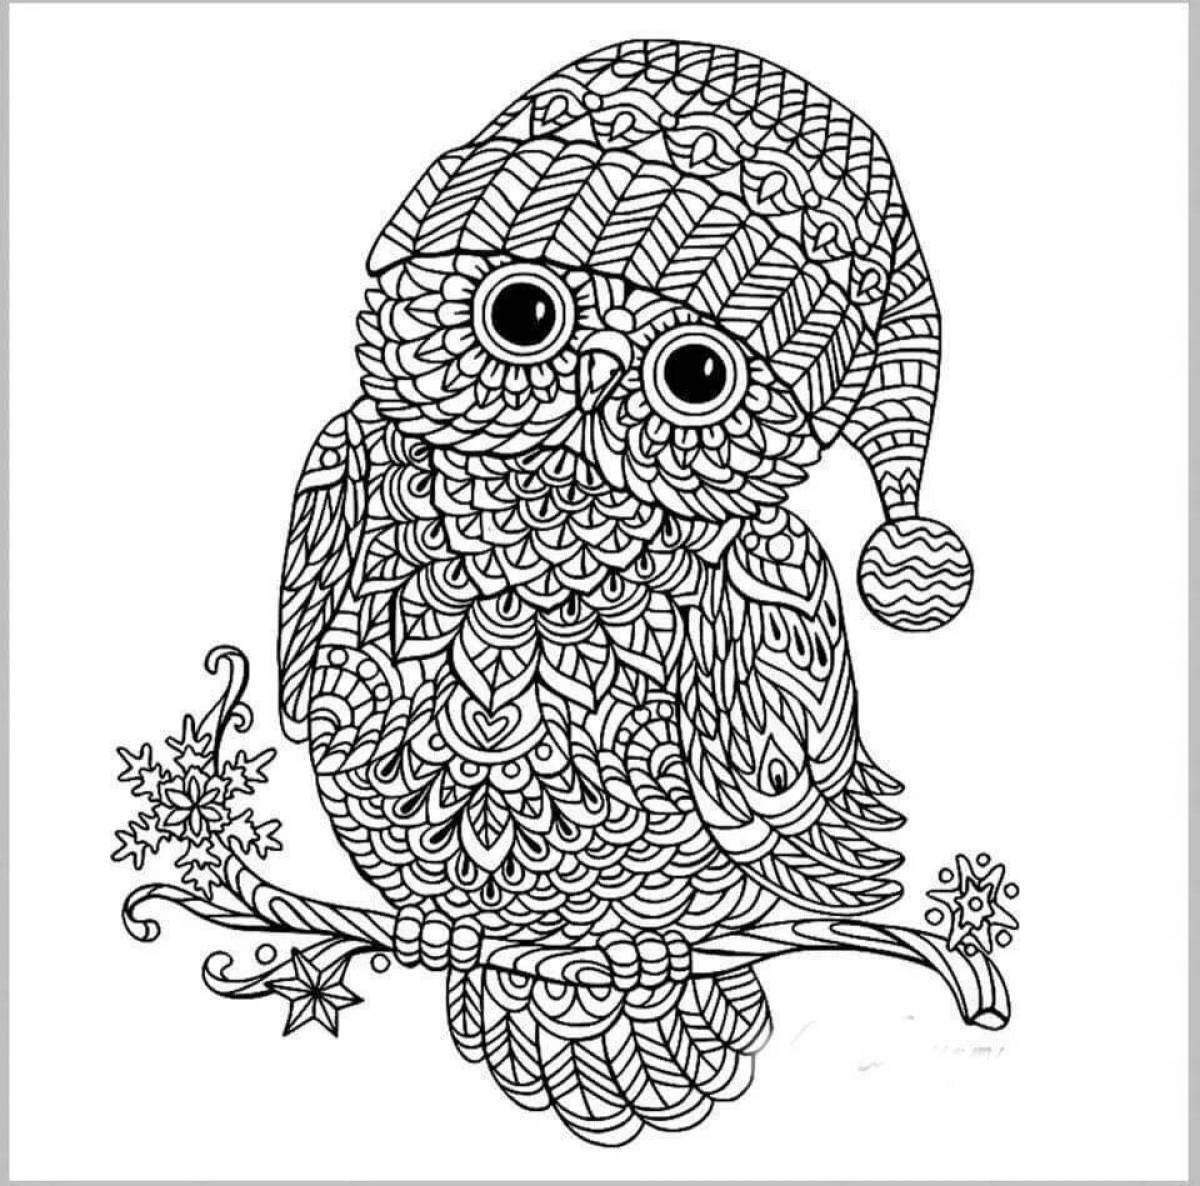 Coloring book funny anti-stress animal complex